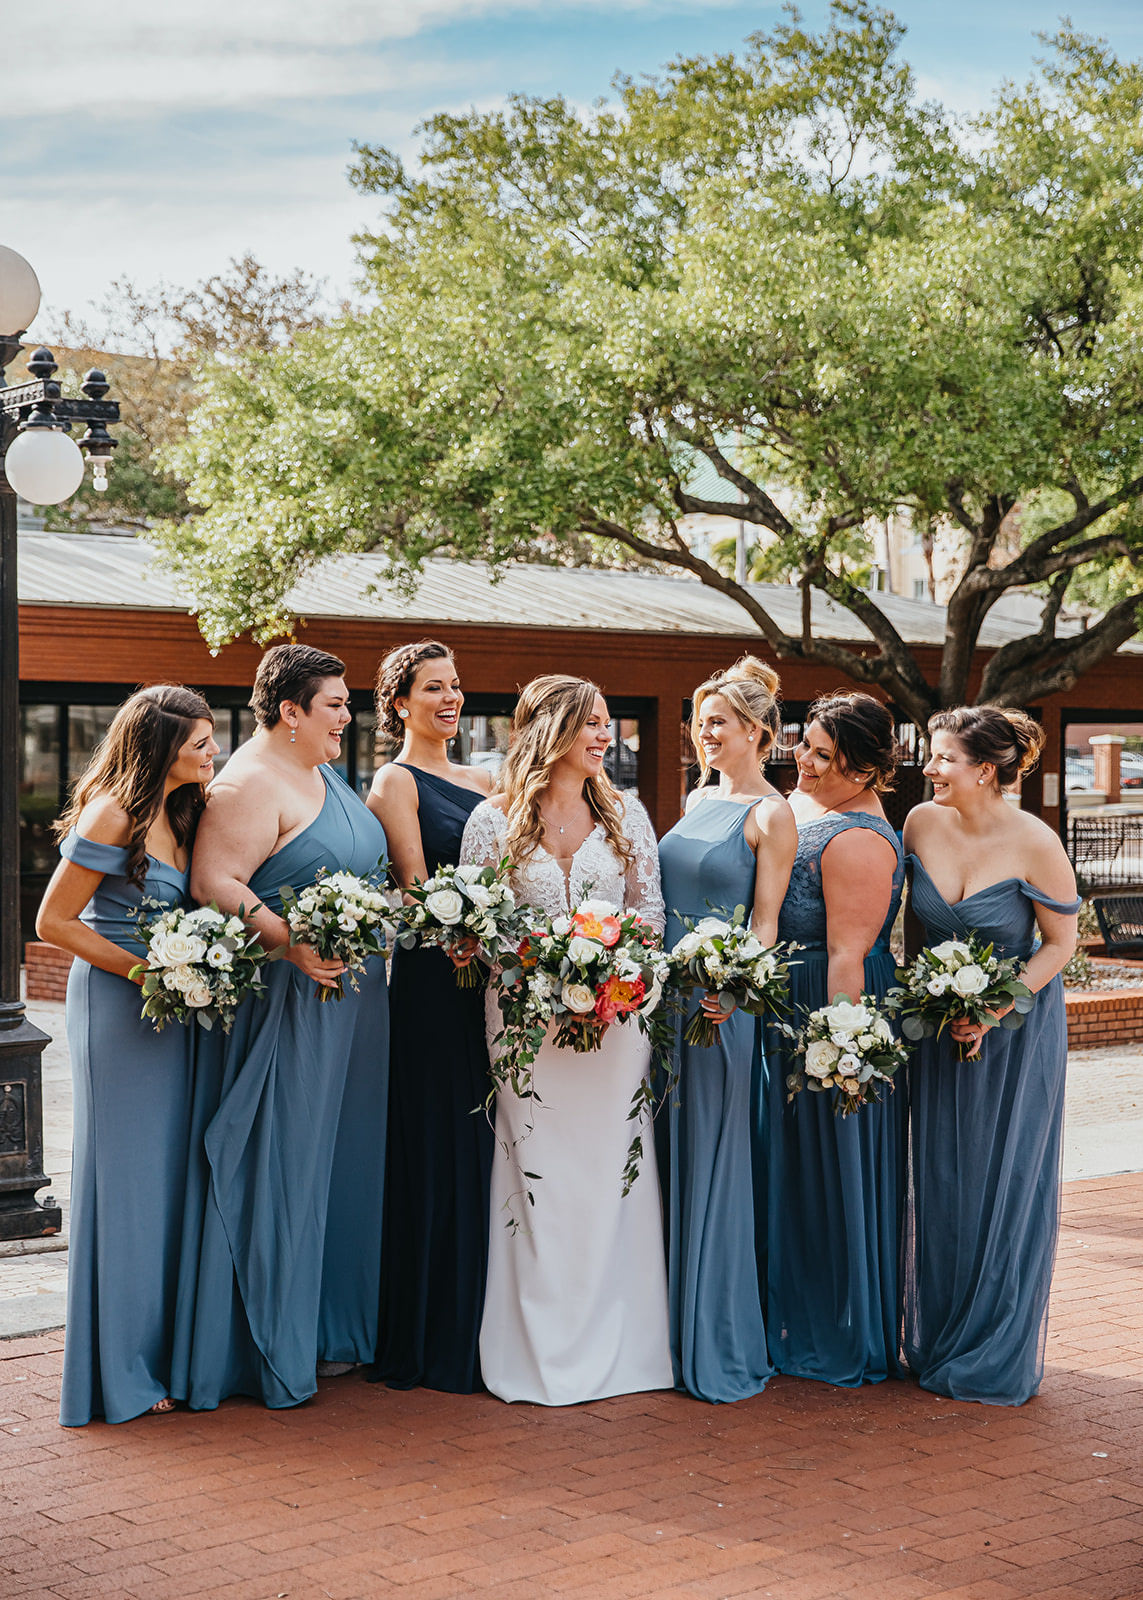 Bride and Bridesmaids Outdoor Portrait Shot | Steel Grey Dusty Blue Long Chiffon Bridesmaid Dresses by David's Bridal | Long Sleeve Lace V Neck Bridal Gown Wedding Dress | Classic White Rose and Greenery Bridesmaid Bouquets with Coral Peonies in Bridal Bouquet | Tampa Wedding Florist Monarch Events and Designs